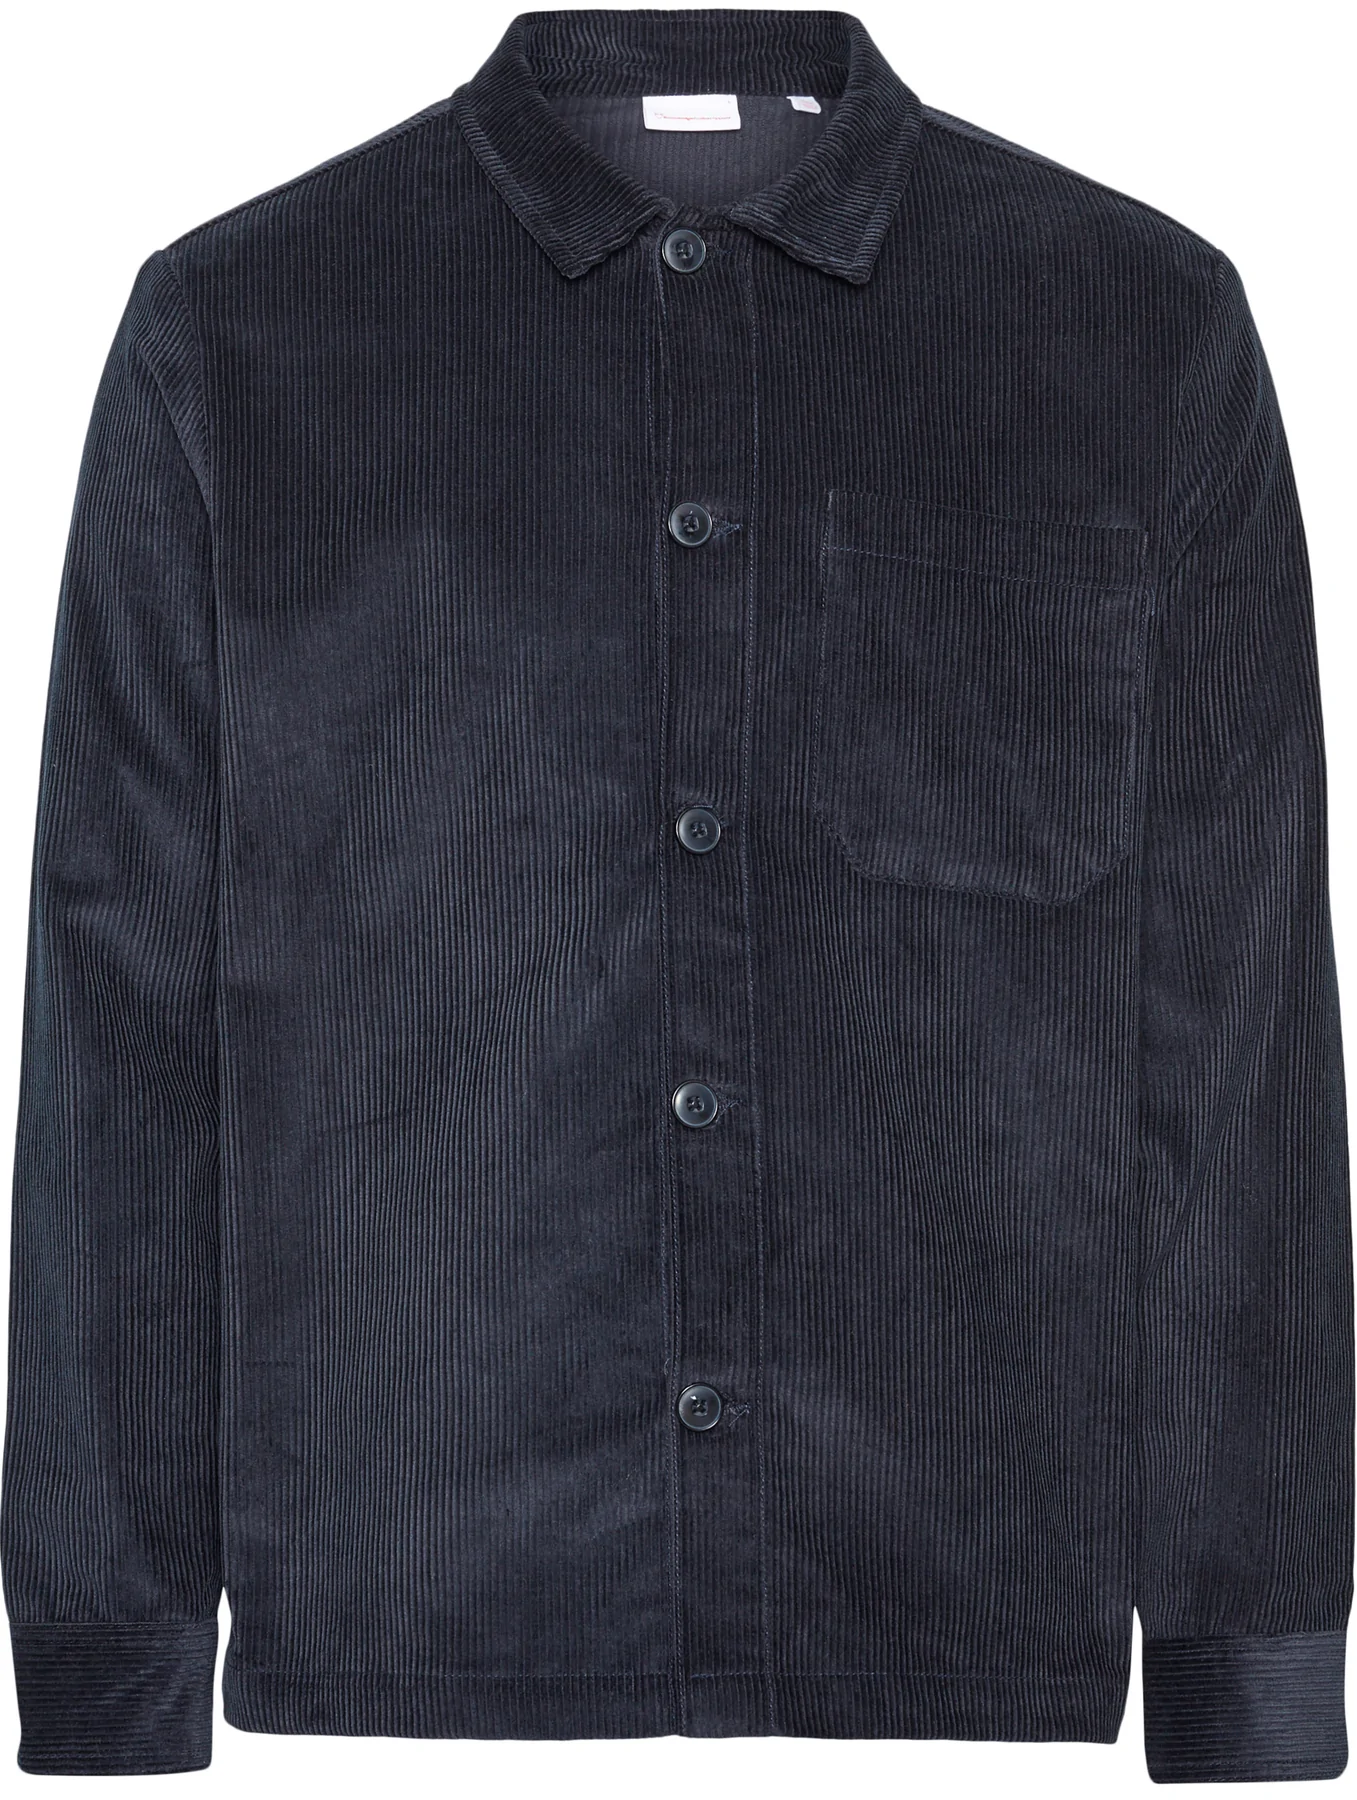 KNOWLEDGE COTTON 94046 stretched corduroy shirt